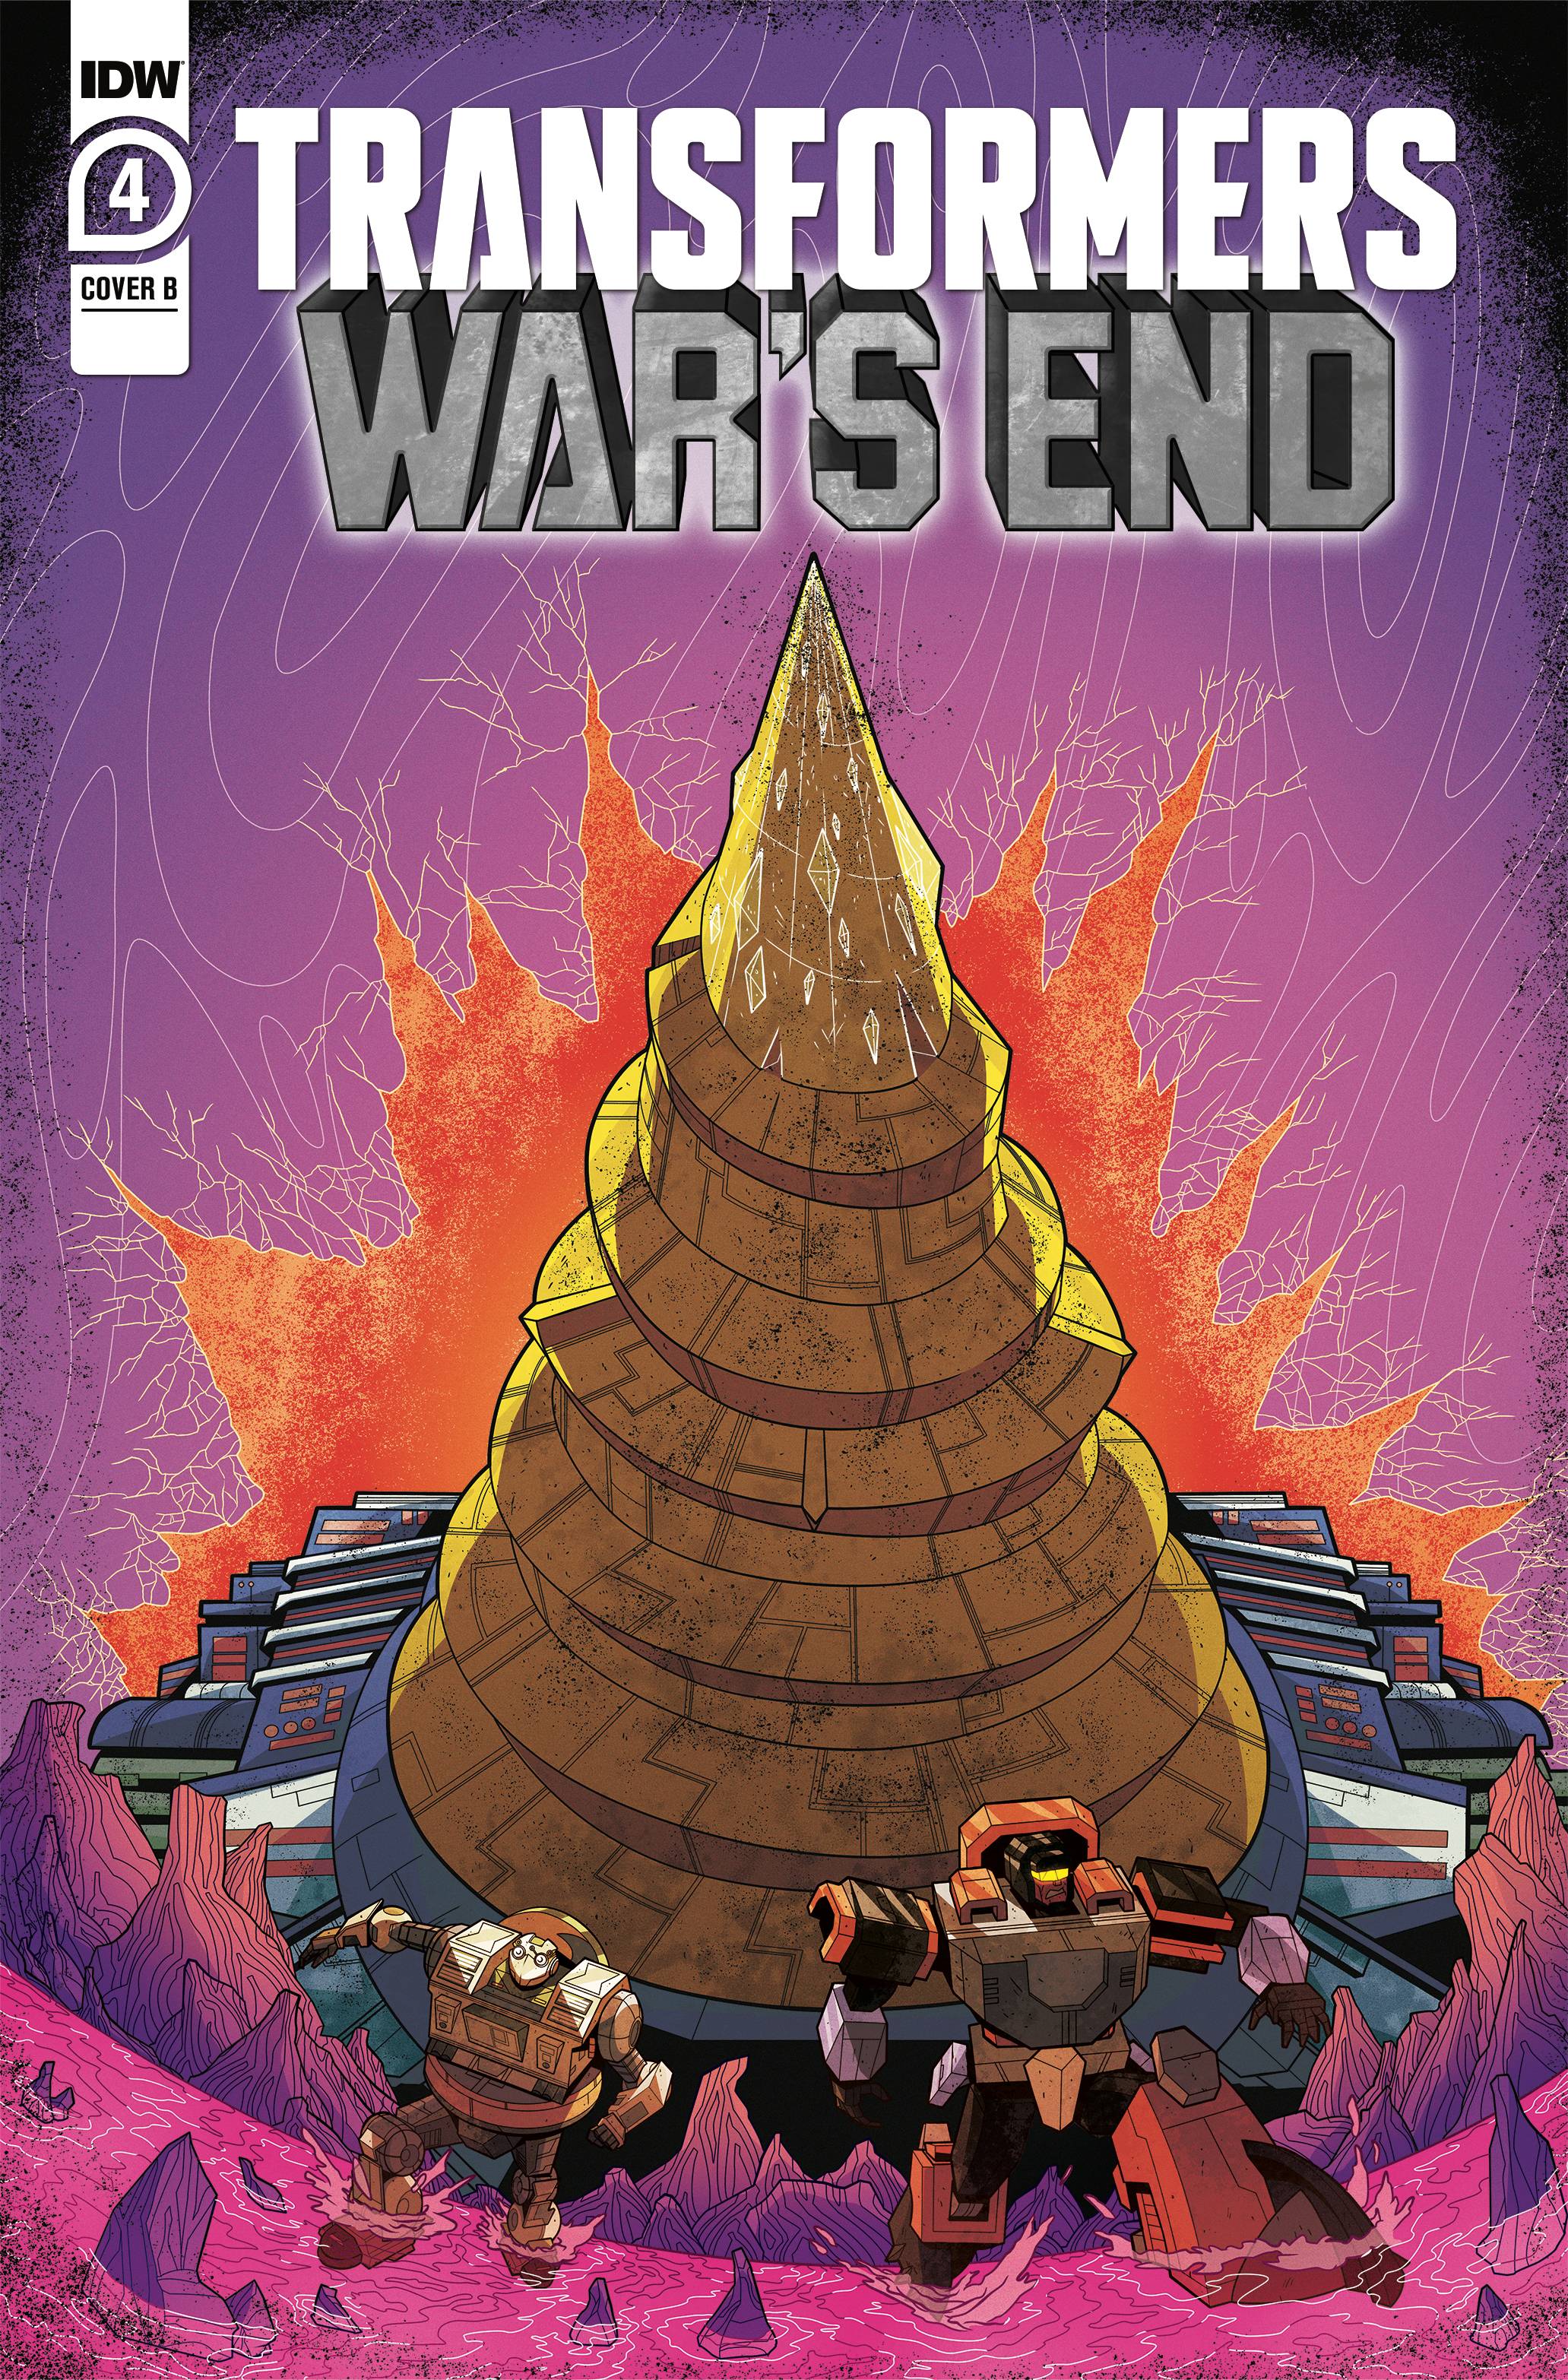 Transformers Wars End #4 Cover B Murphy (Of 4)